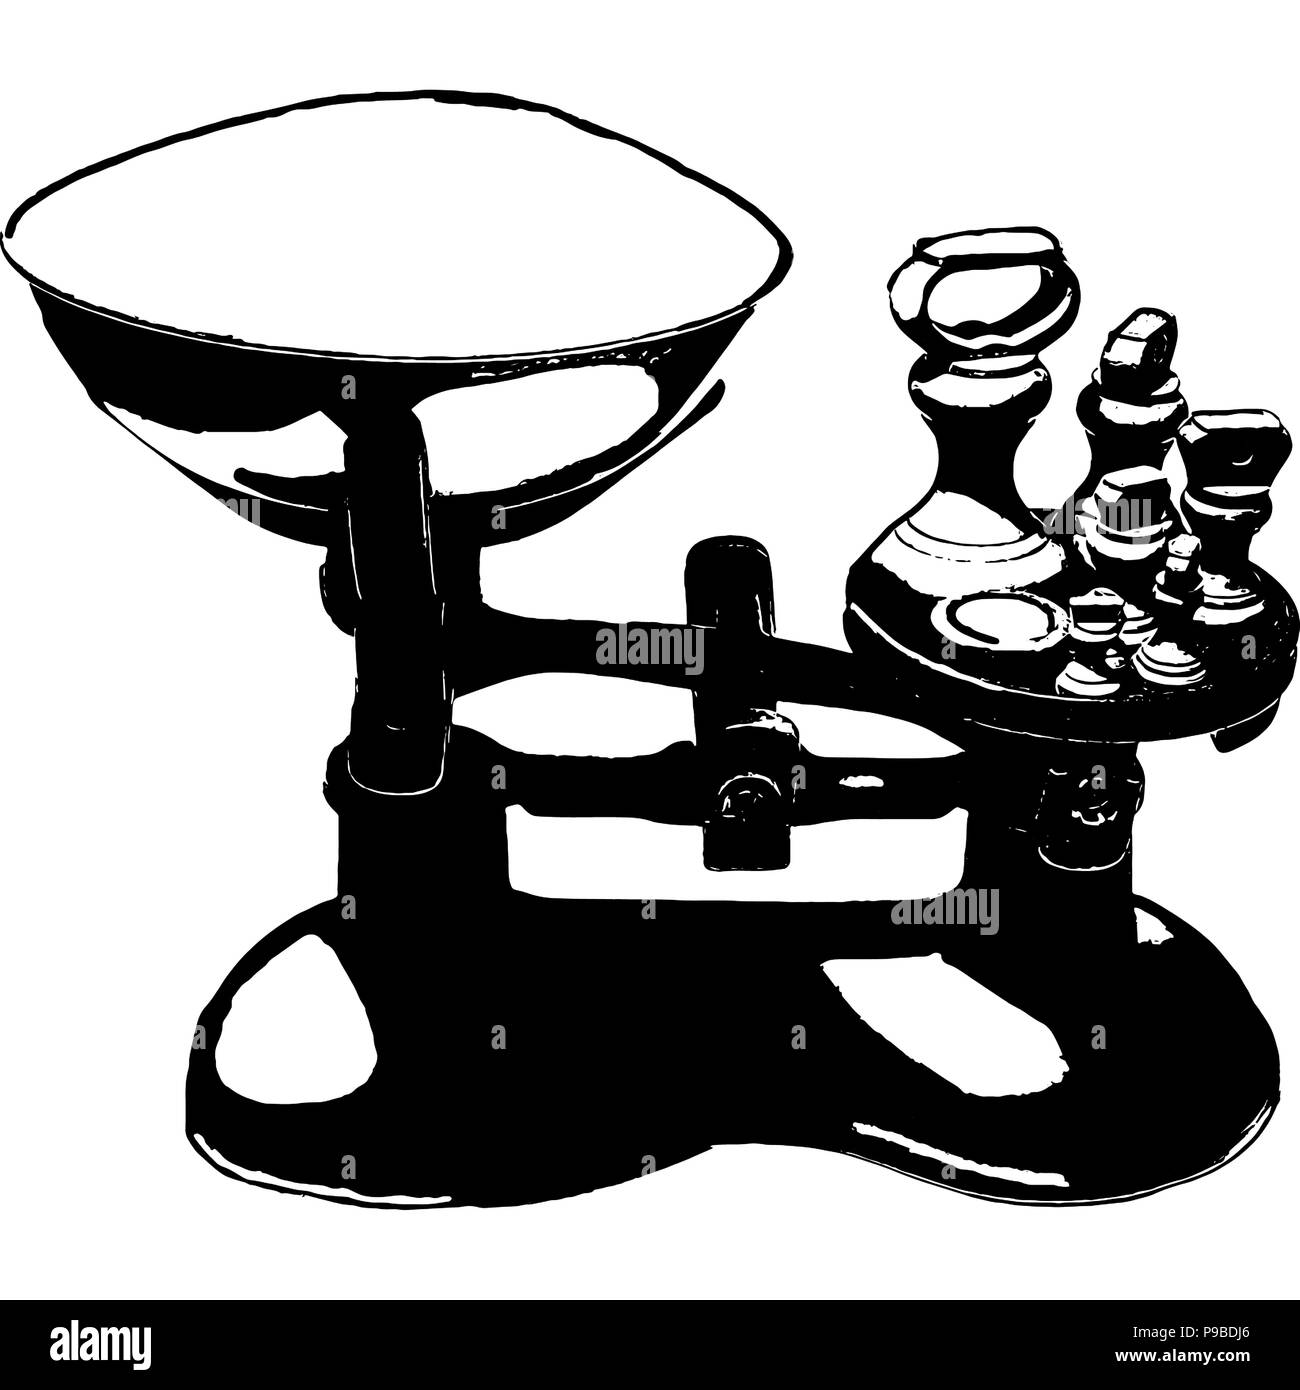 Black and white vector graphic of traditional cast iron cooking scales. Stock Vector